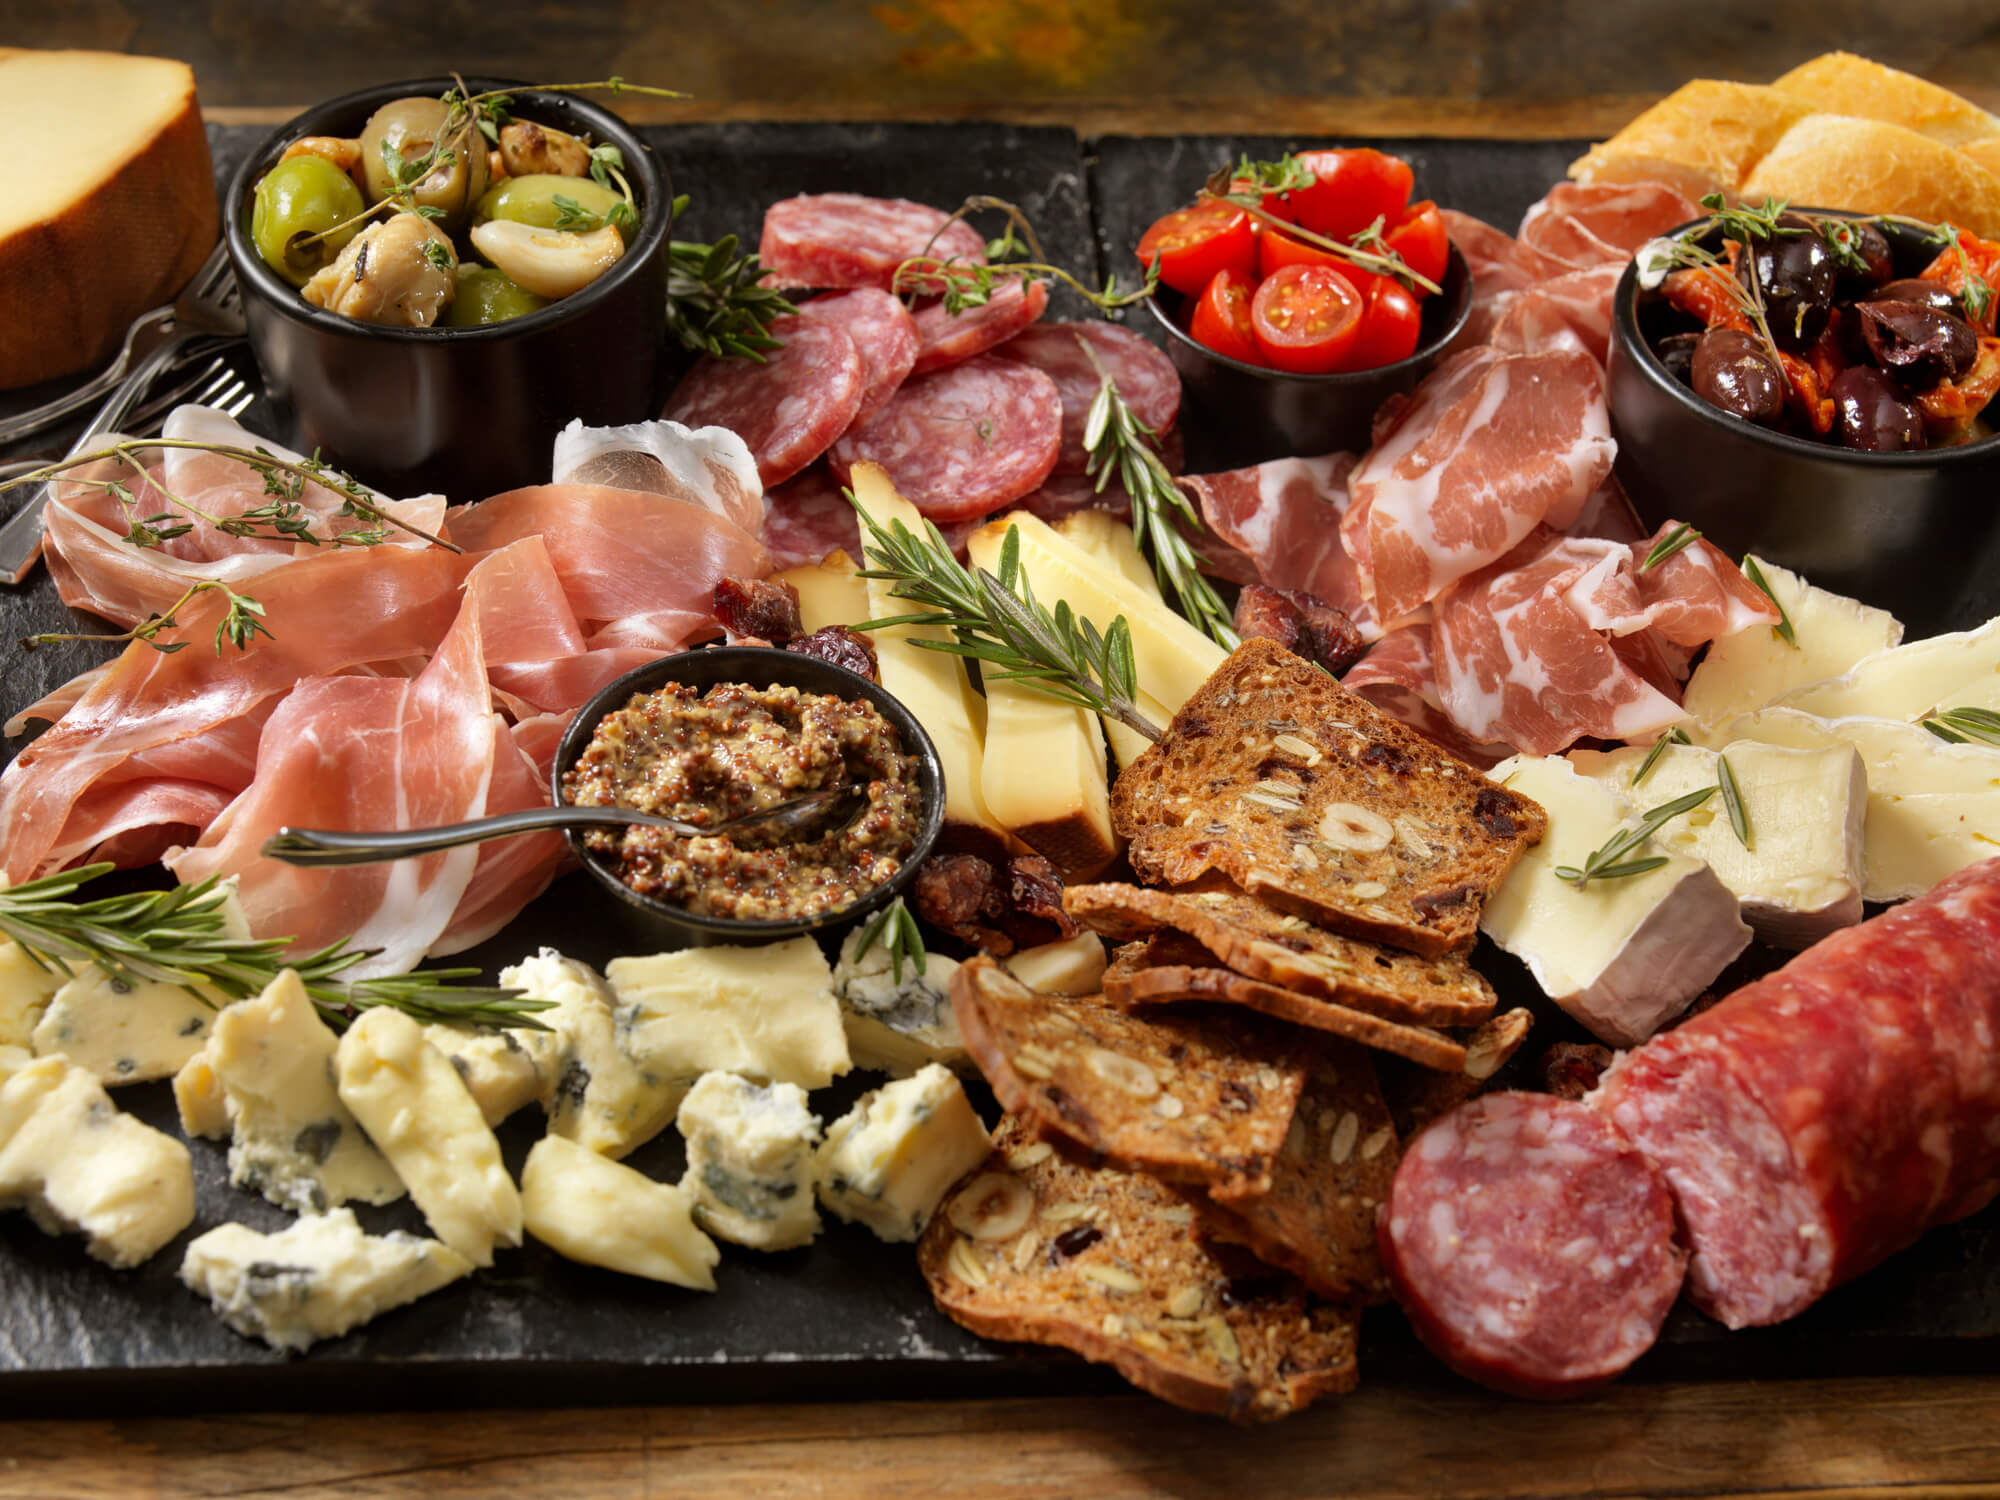 A cheese board complete with cheese, meat, bread, vegetables, and dips.